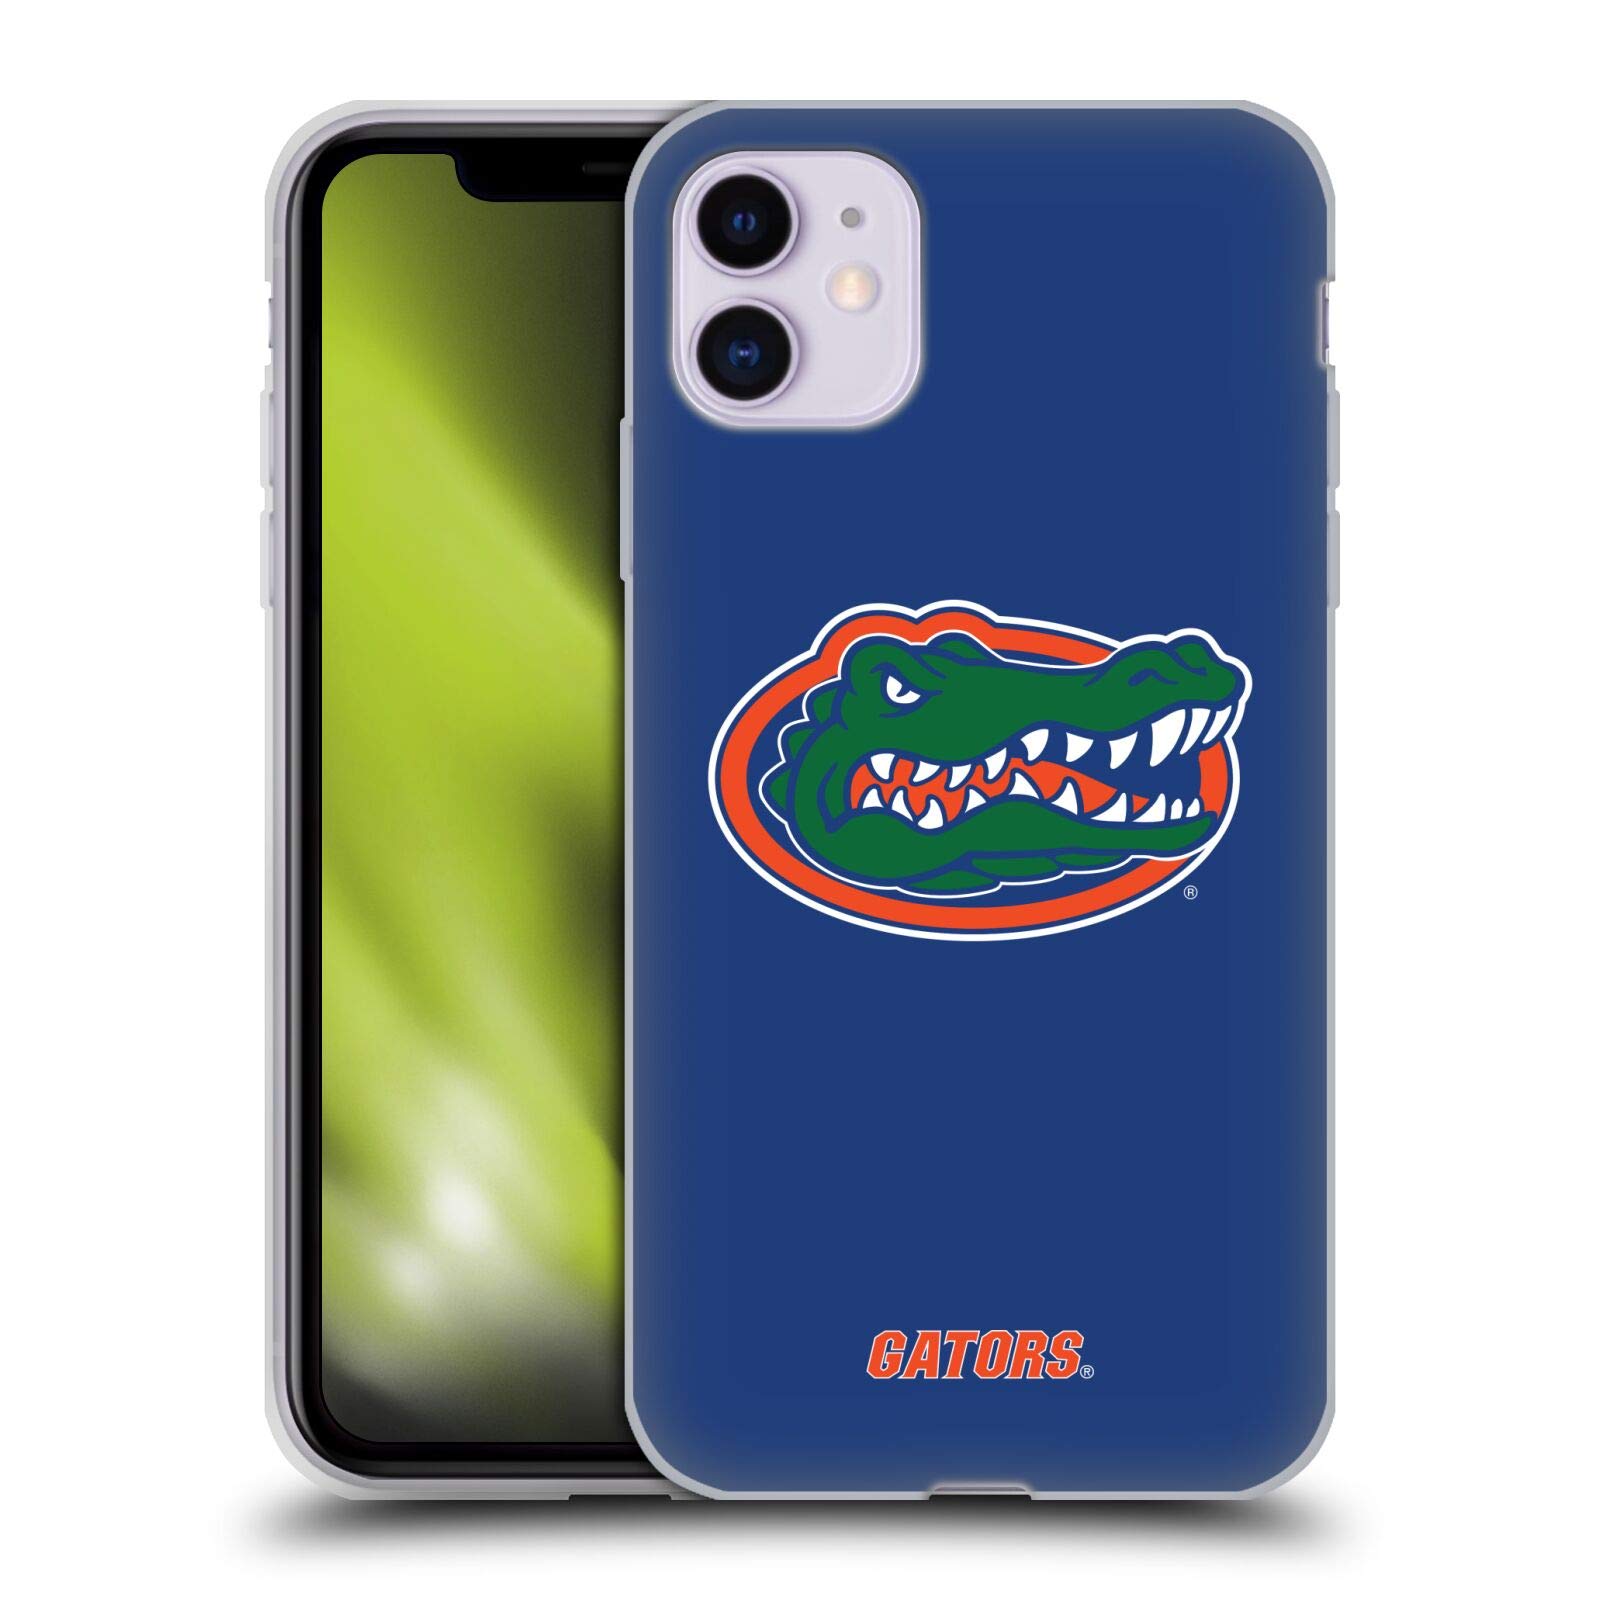 Head Case Designs Officially Licensed University of Florida UF Plain Soft Gel Case Compatible with Apple iPhone 11